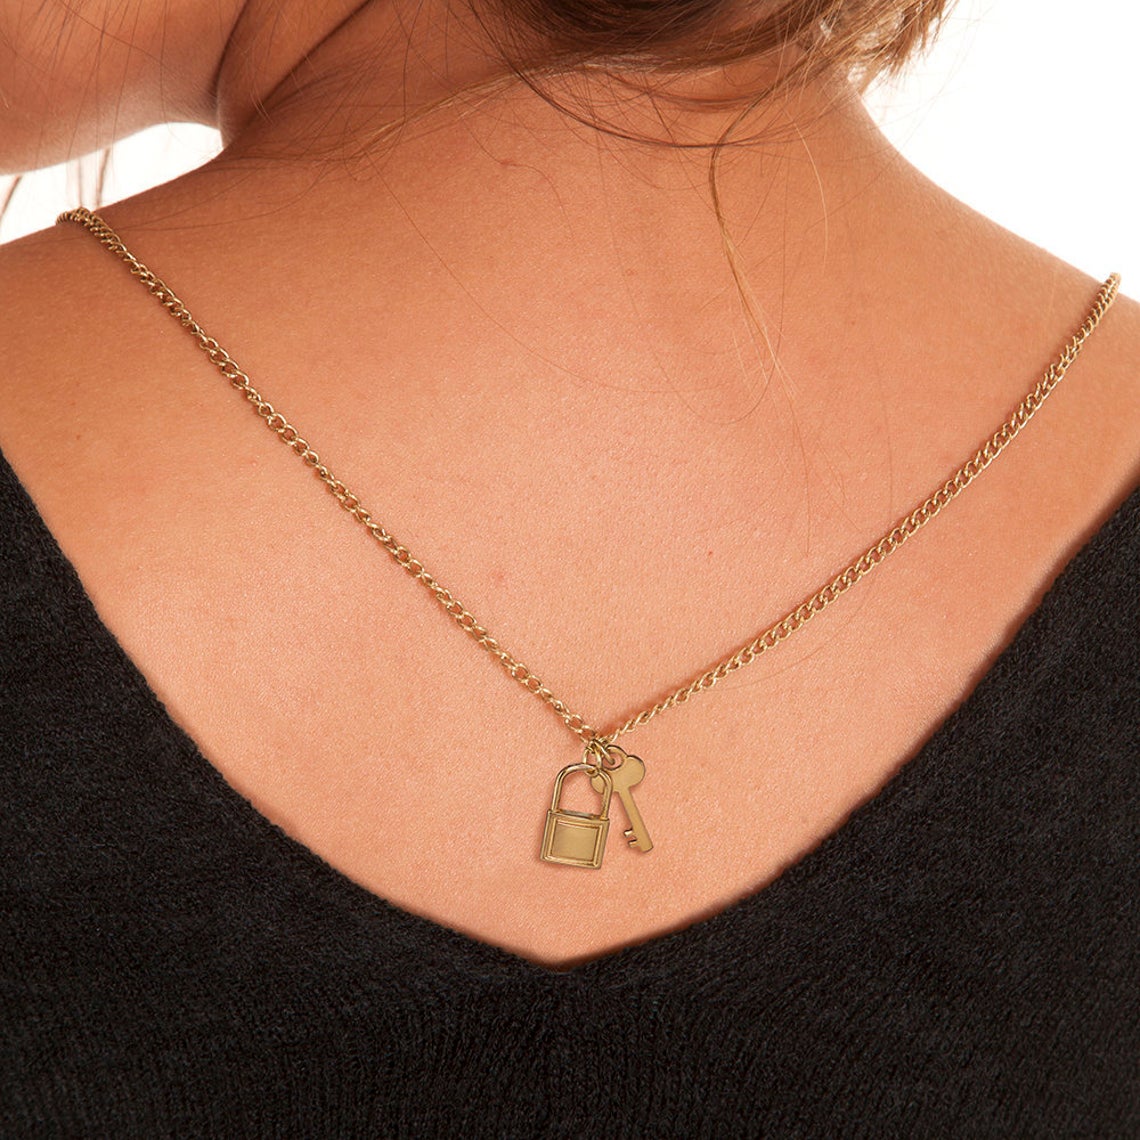 Gold Lock and Key Necklace / CZ Lock and Key Pendants / Dainty 